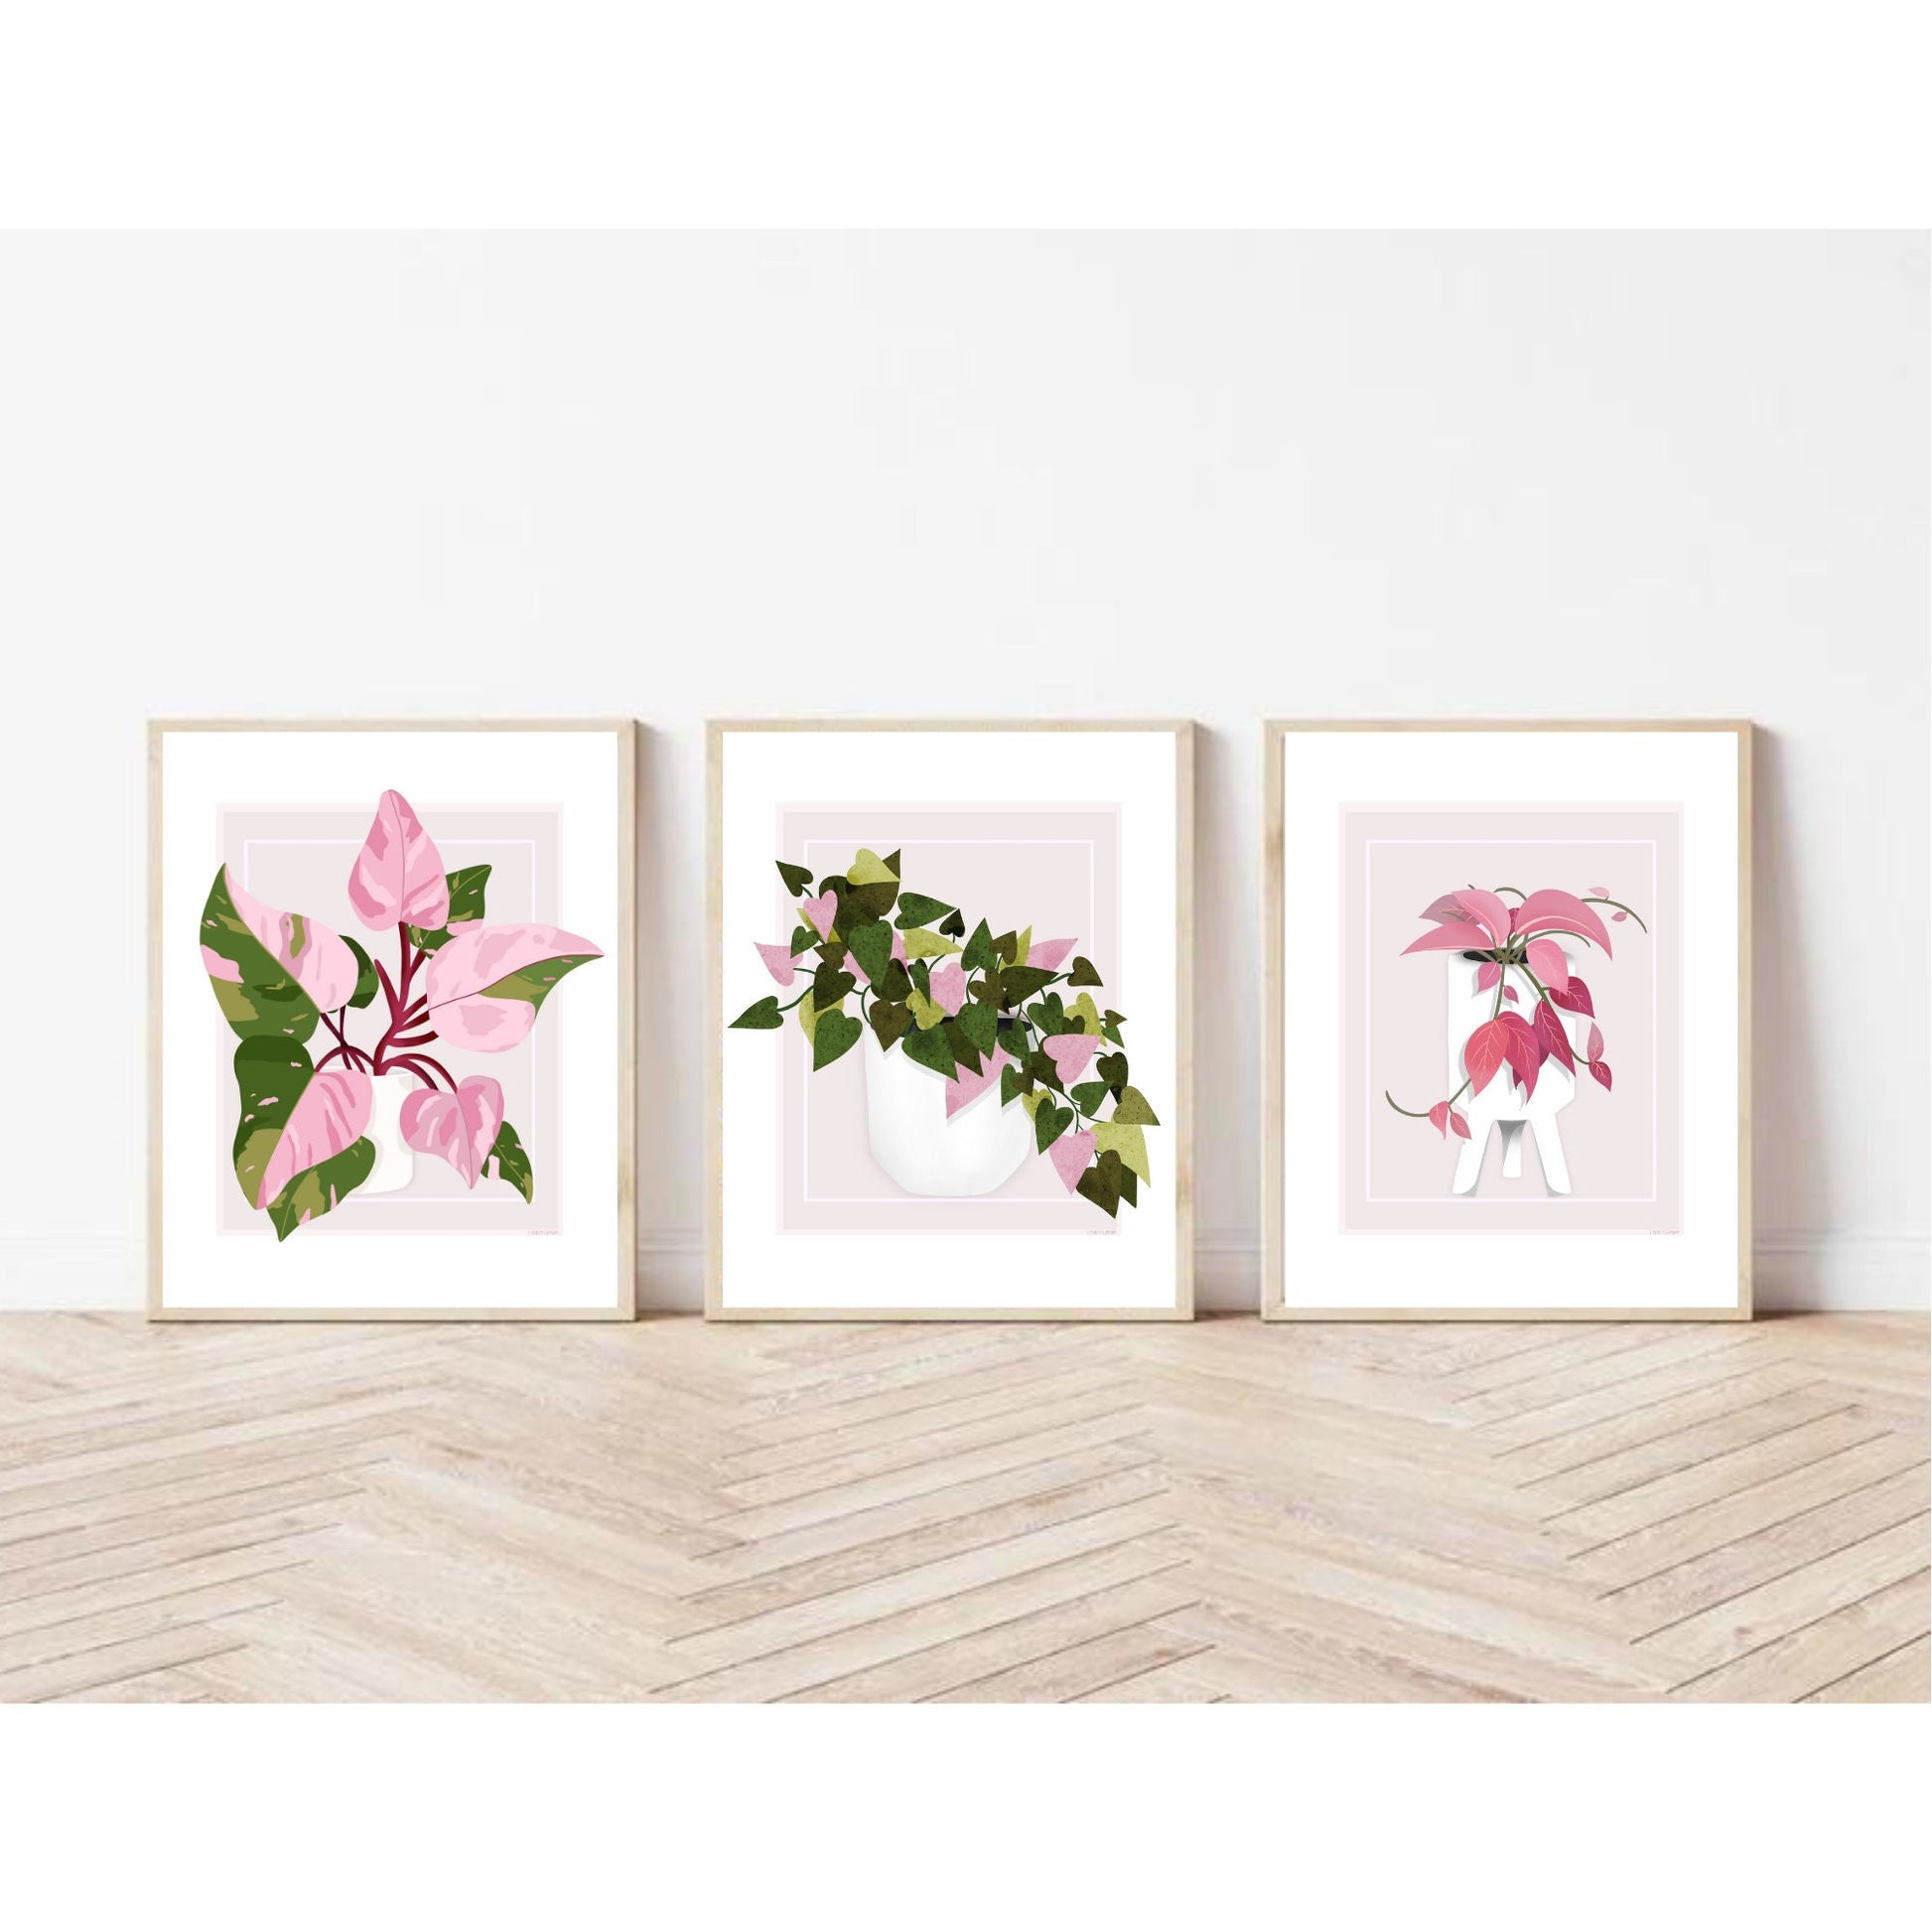 The pictures include one drawing of a Hoya potted plant, one drawing of a Philodendron, and one drawing of a black and gold Philodendron. All drawn in shades of pink and green. Brighten up any room with these bold, beautiful prints!  